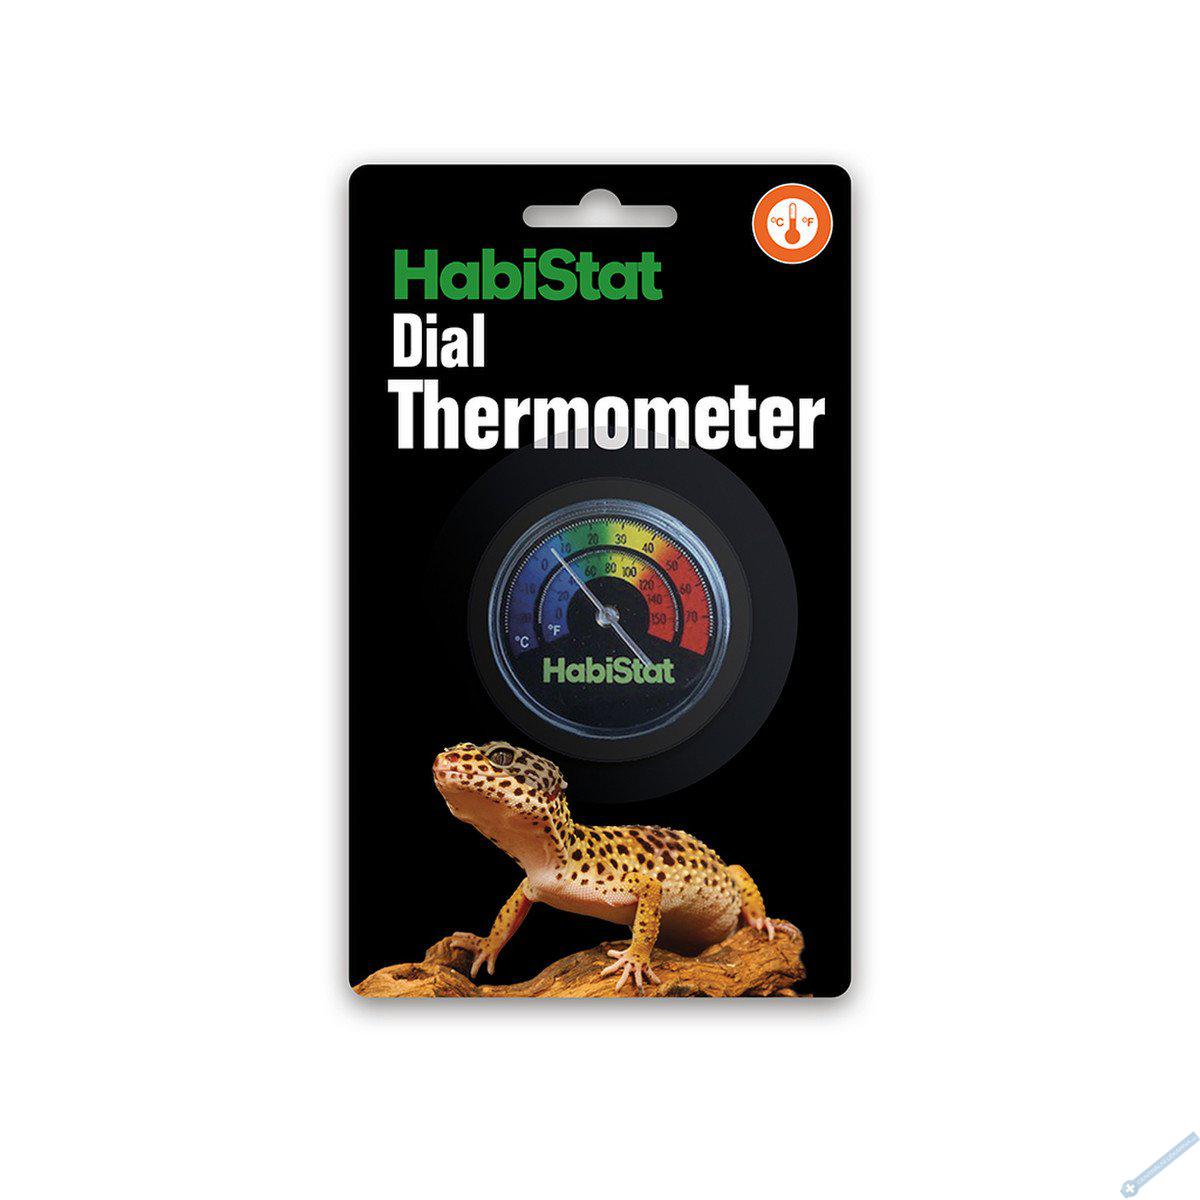 HabiStat Dial Thermometer - teplomr